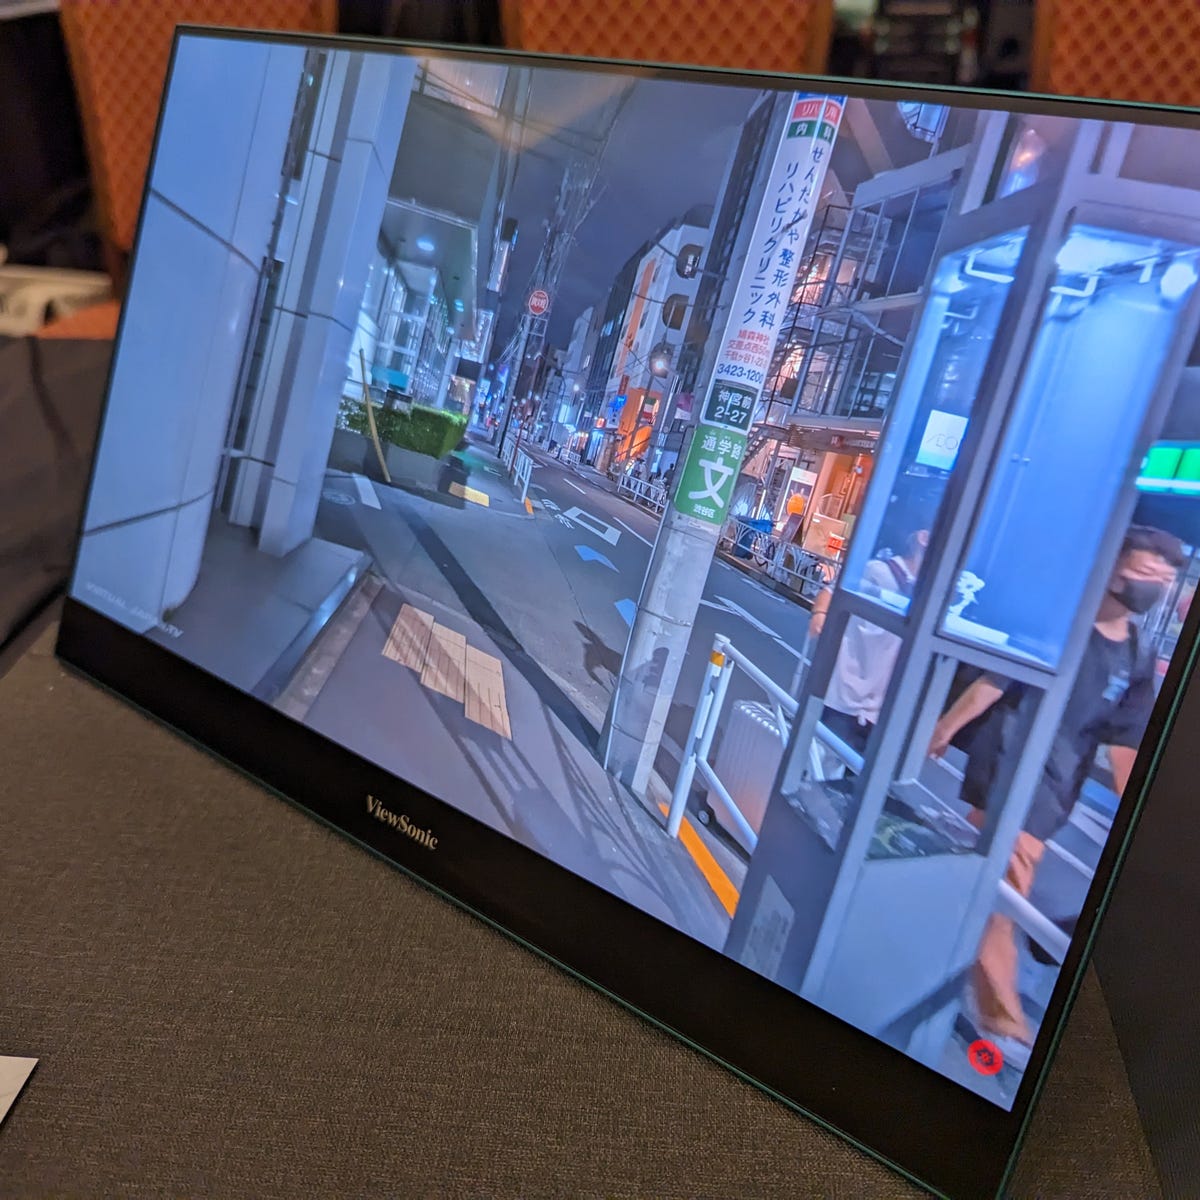 ViewSonic's Portable 4K OLED Monitor Is Something I'd Actually Use - CNET